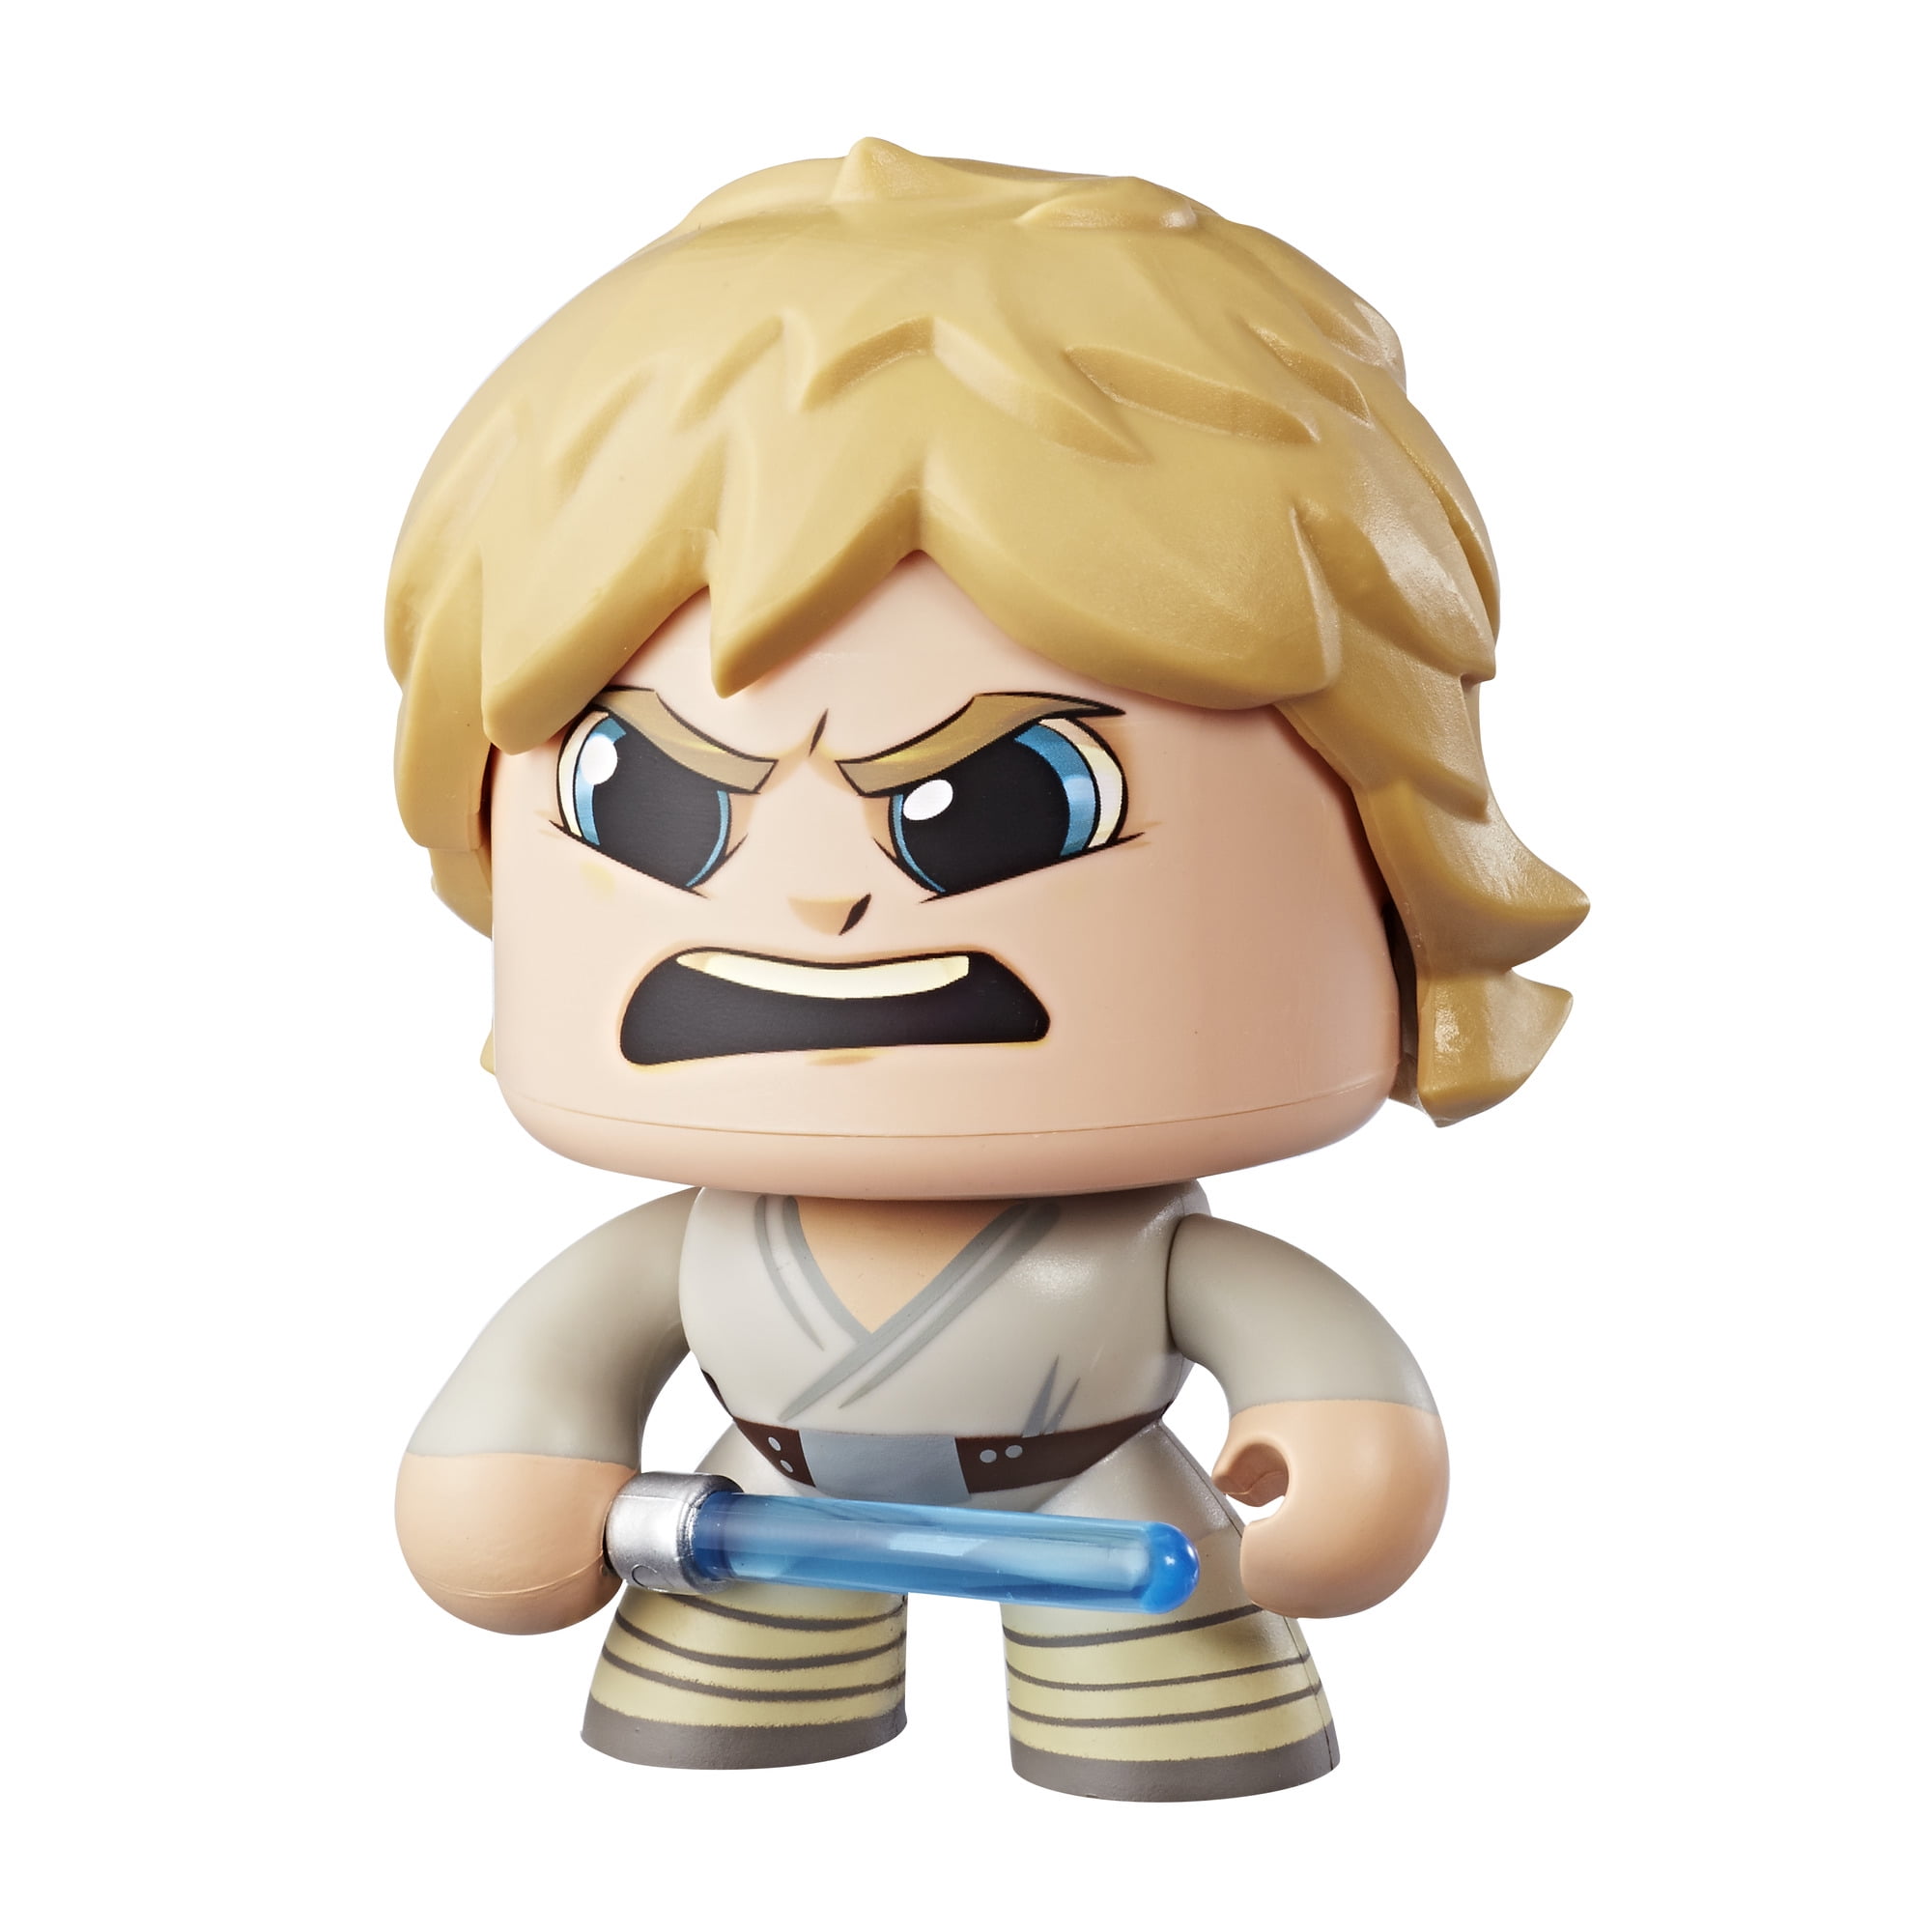 Star Wars Mighty Muggs Luke Skywalker #3, Ages 4 and up